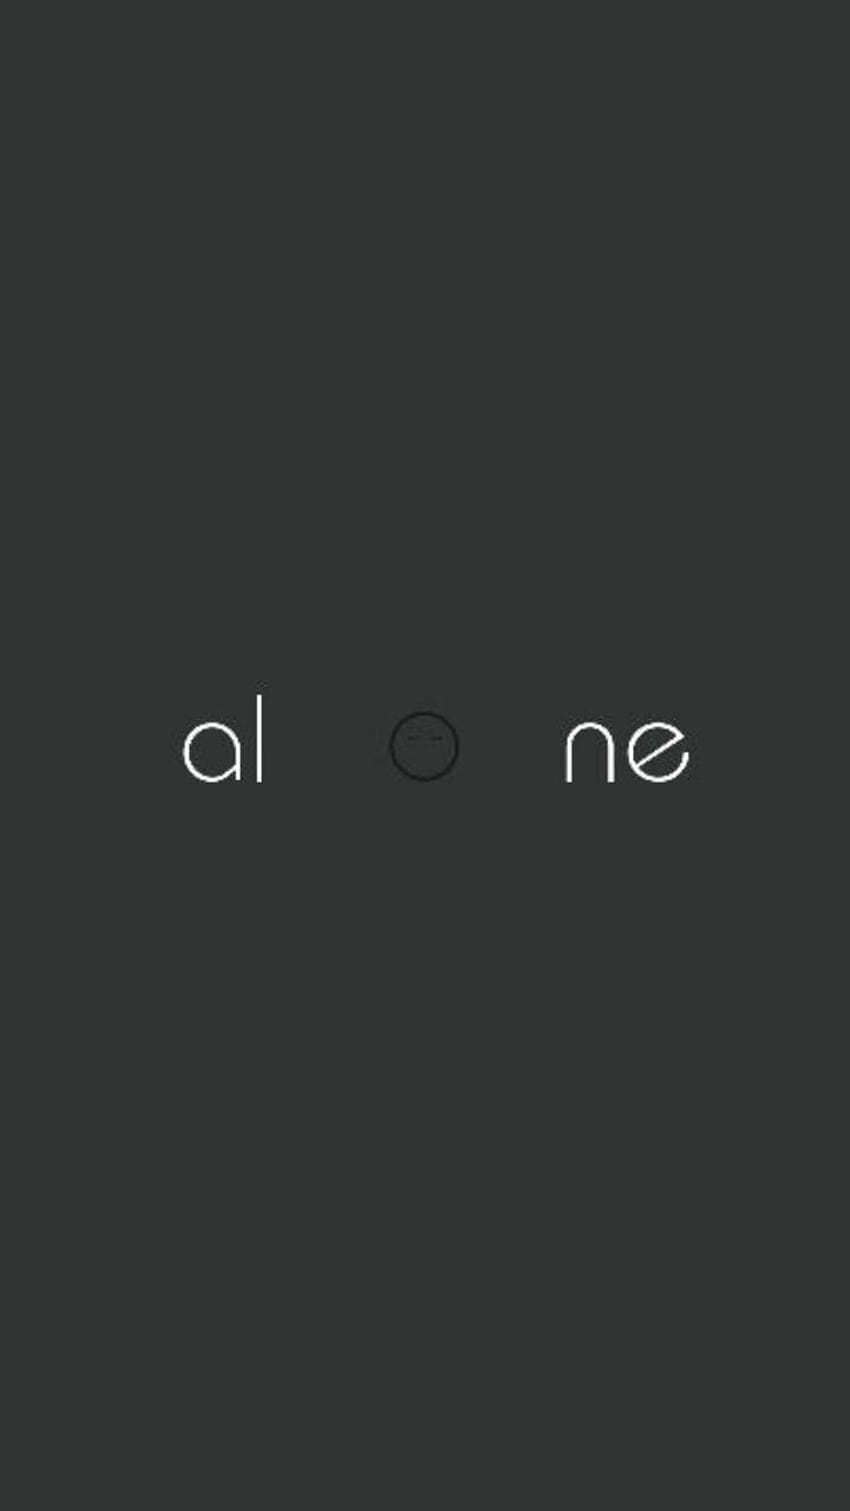 Alone for Android, alone text HD phone wallpaper